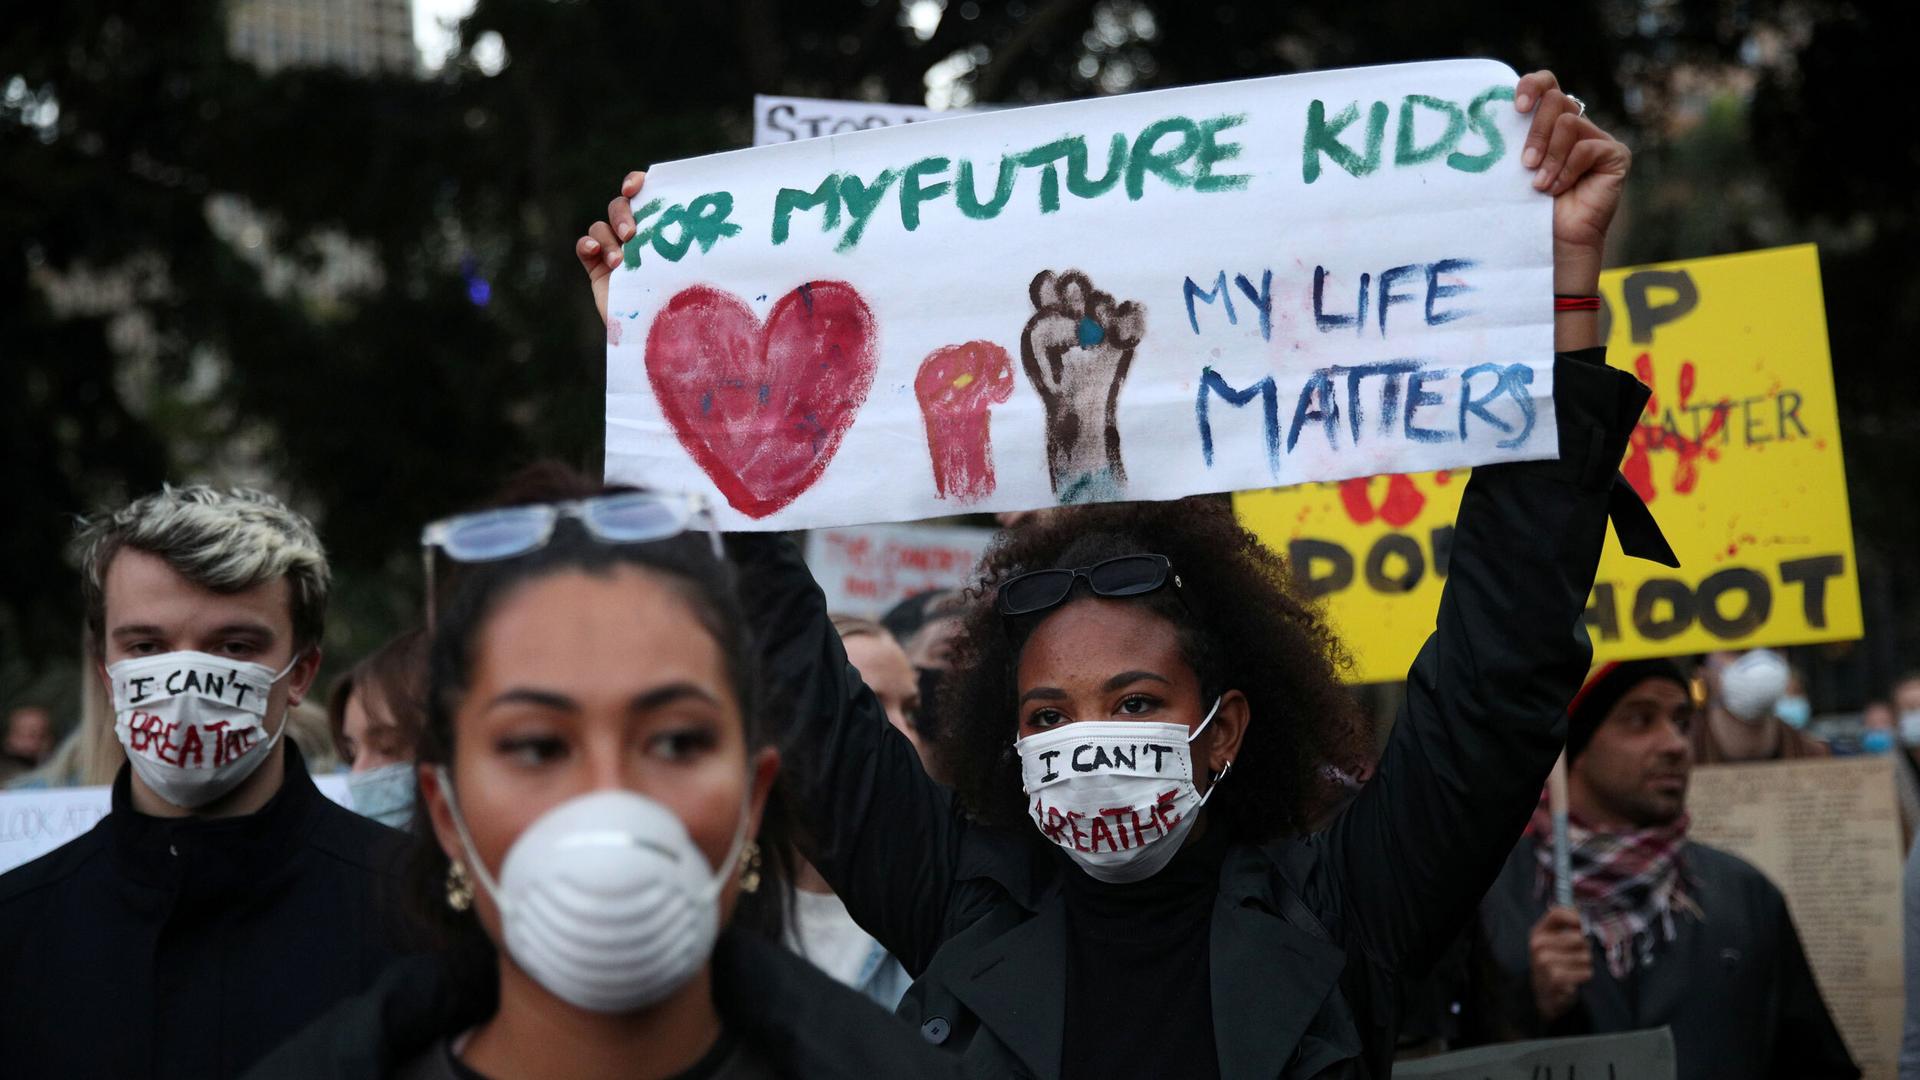 People protest, one woman with a sign "for my future kids my life matters" 